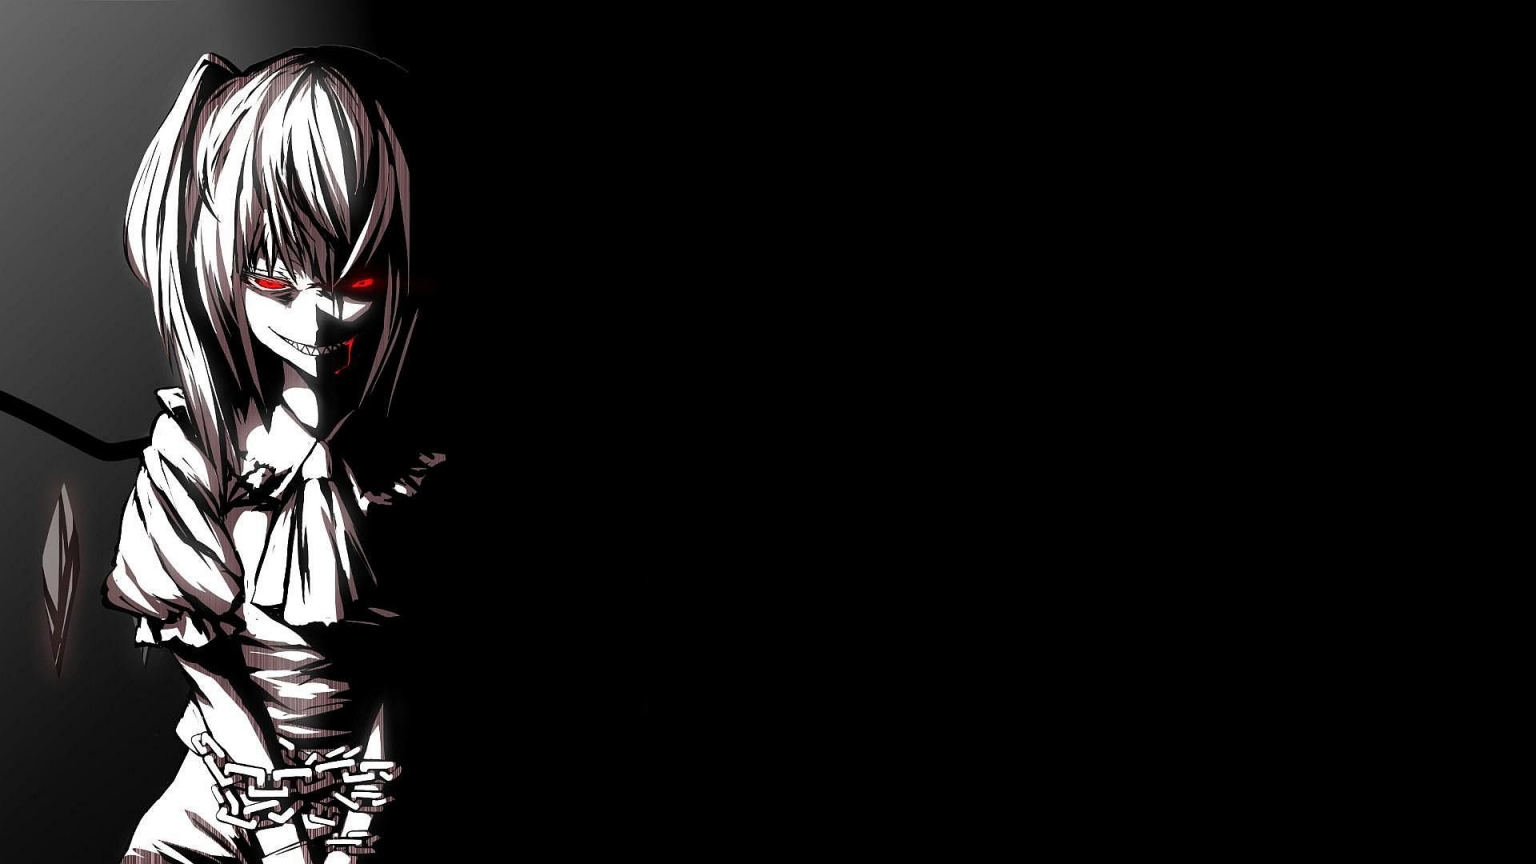 Anime Grunge PC Wallpapers - Wallpaper Cave